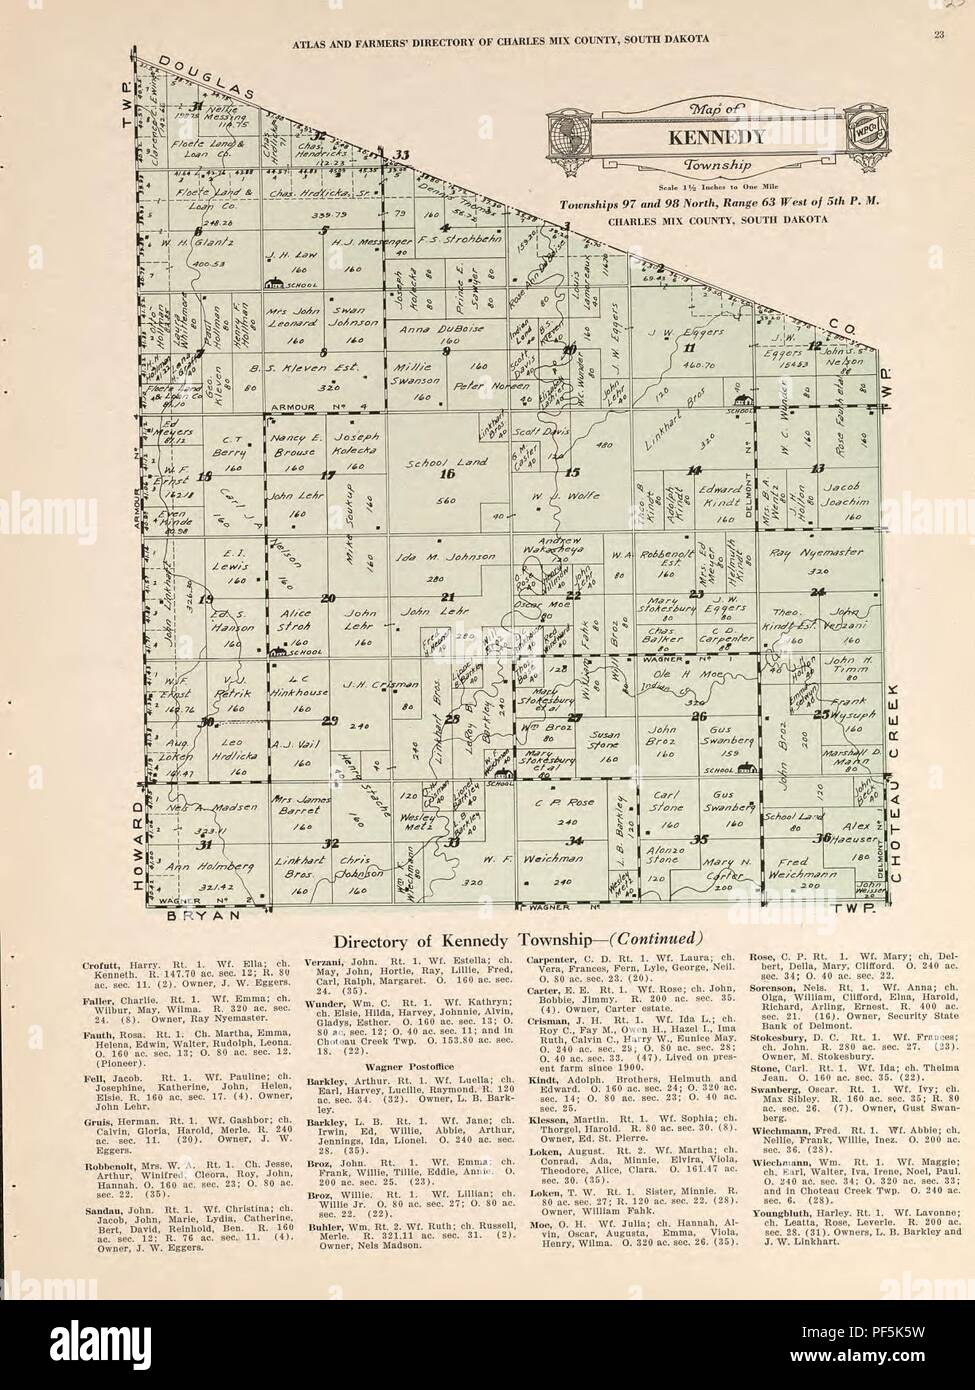 Atlas and farmers' directory of Charles Mix County, South Dakota - containing plats of all townships with owners' names, an outline map of the county and a state map of South Dakota, compiled from Stock Photo